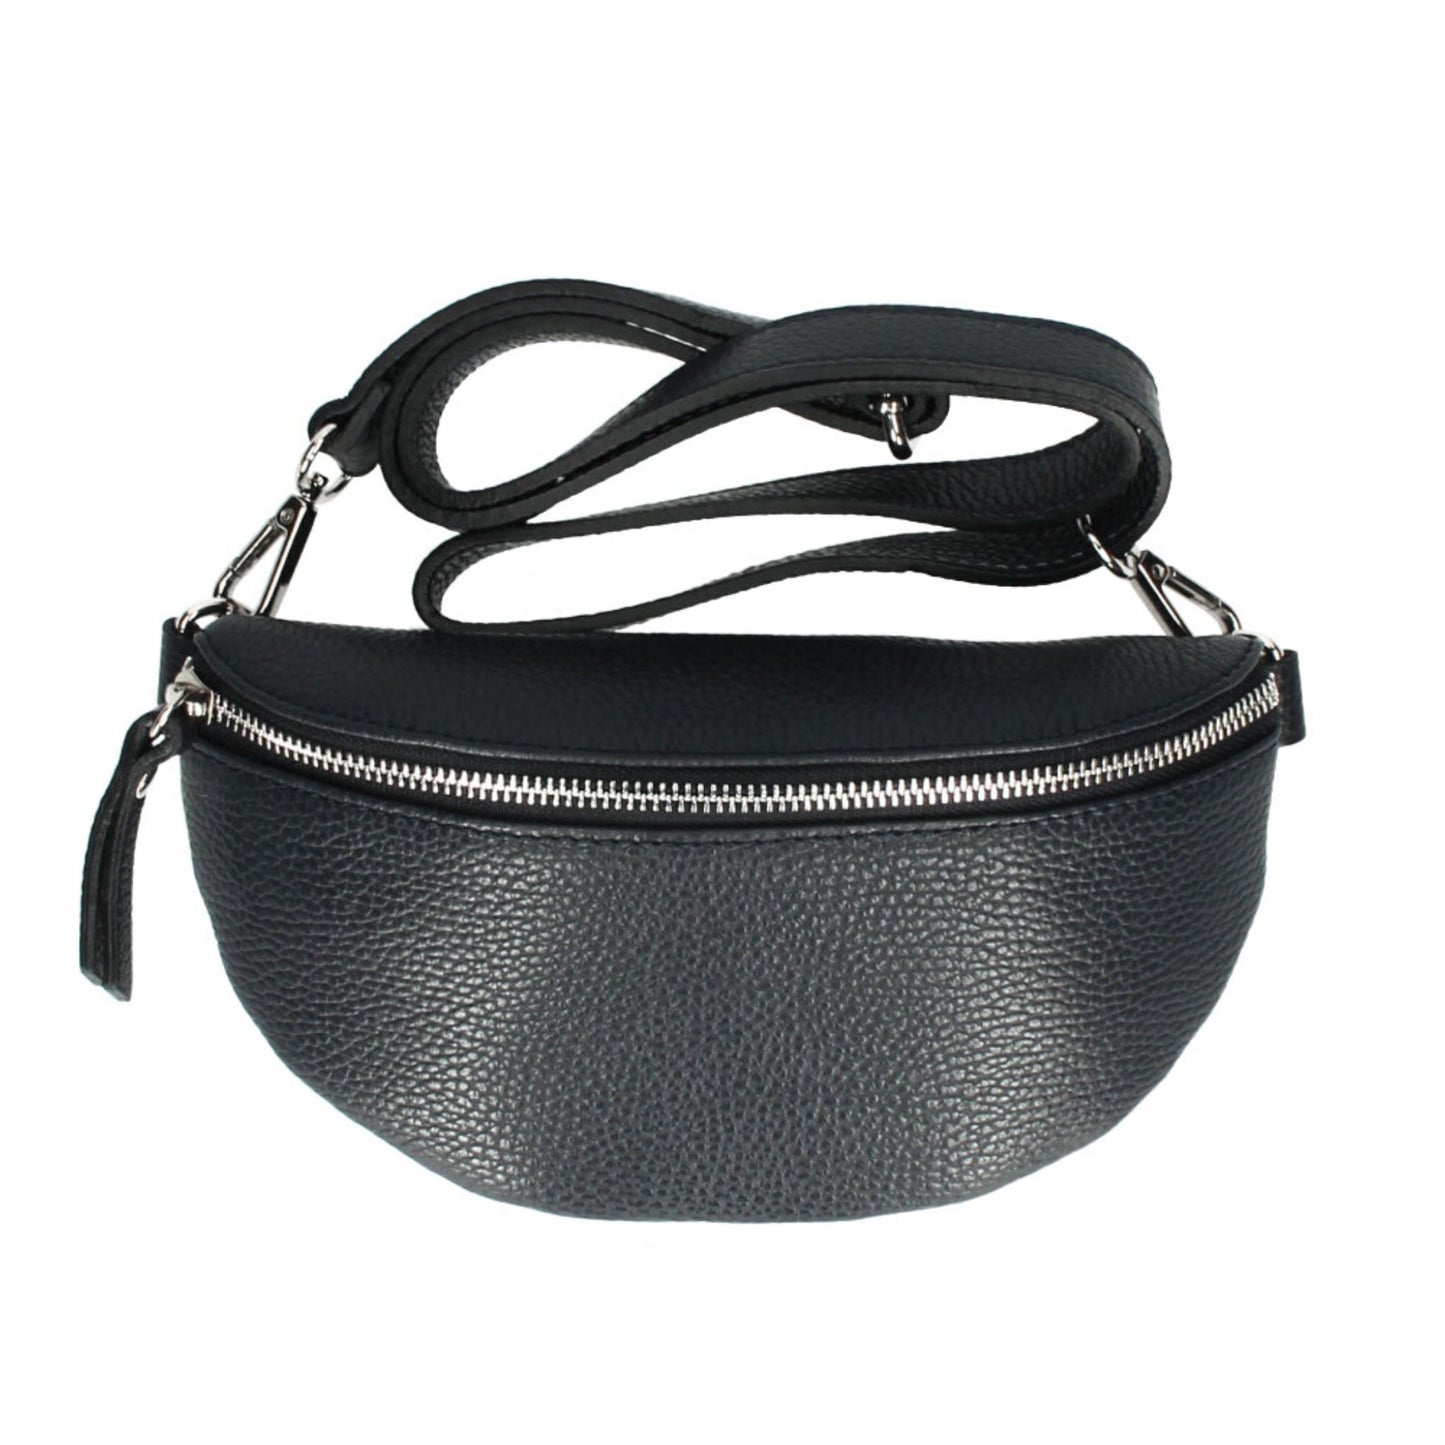 The Small Leather BumBag / Sling Bag